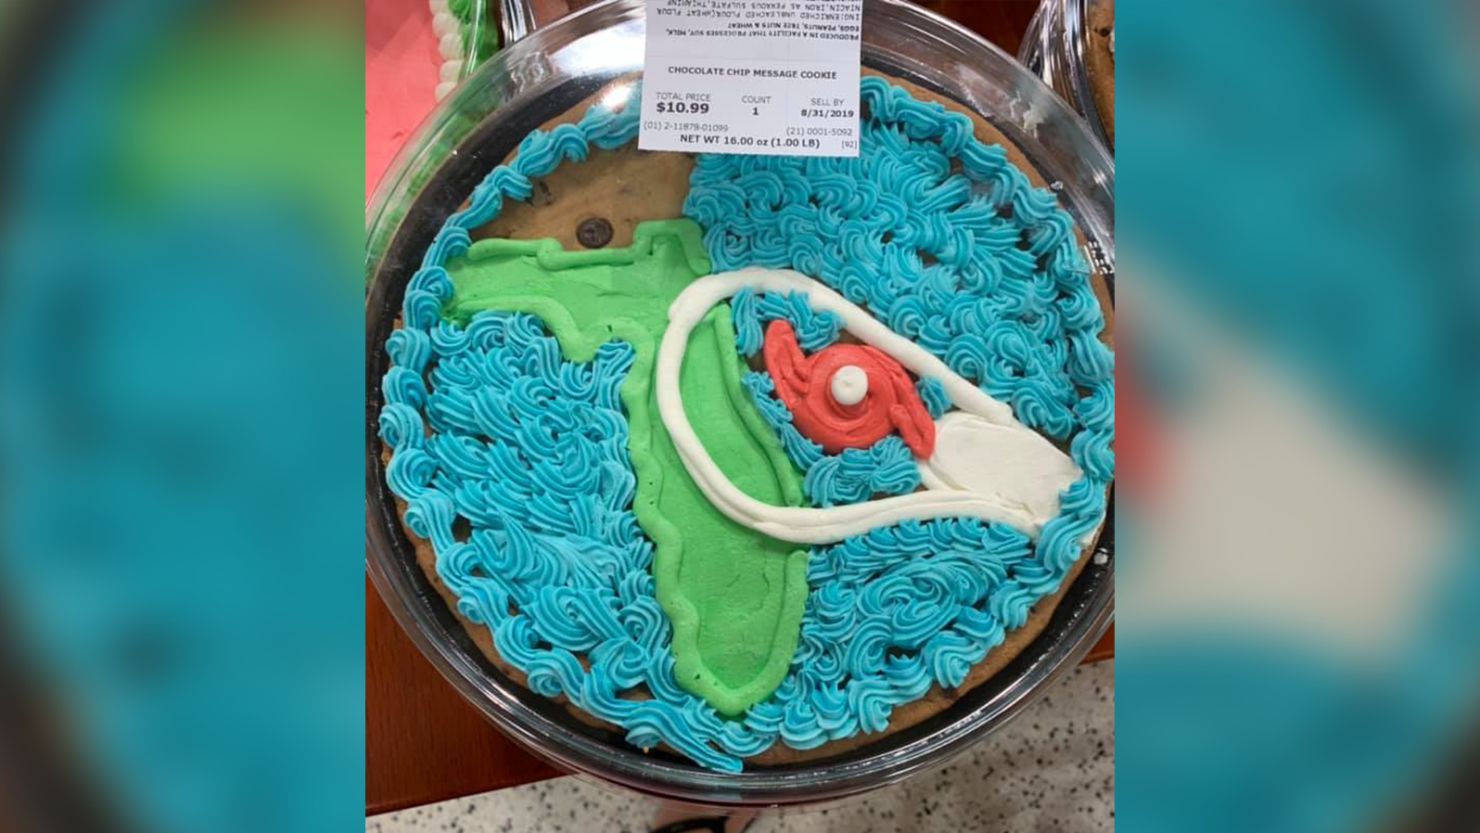 A Publix cookie cake was making waves on social media. 